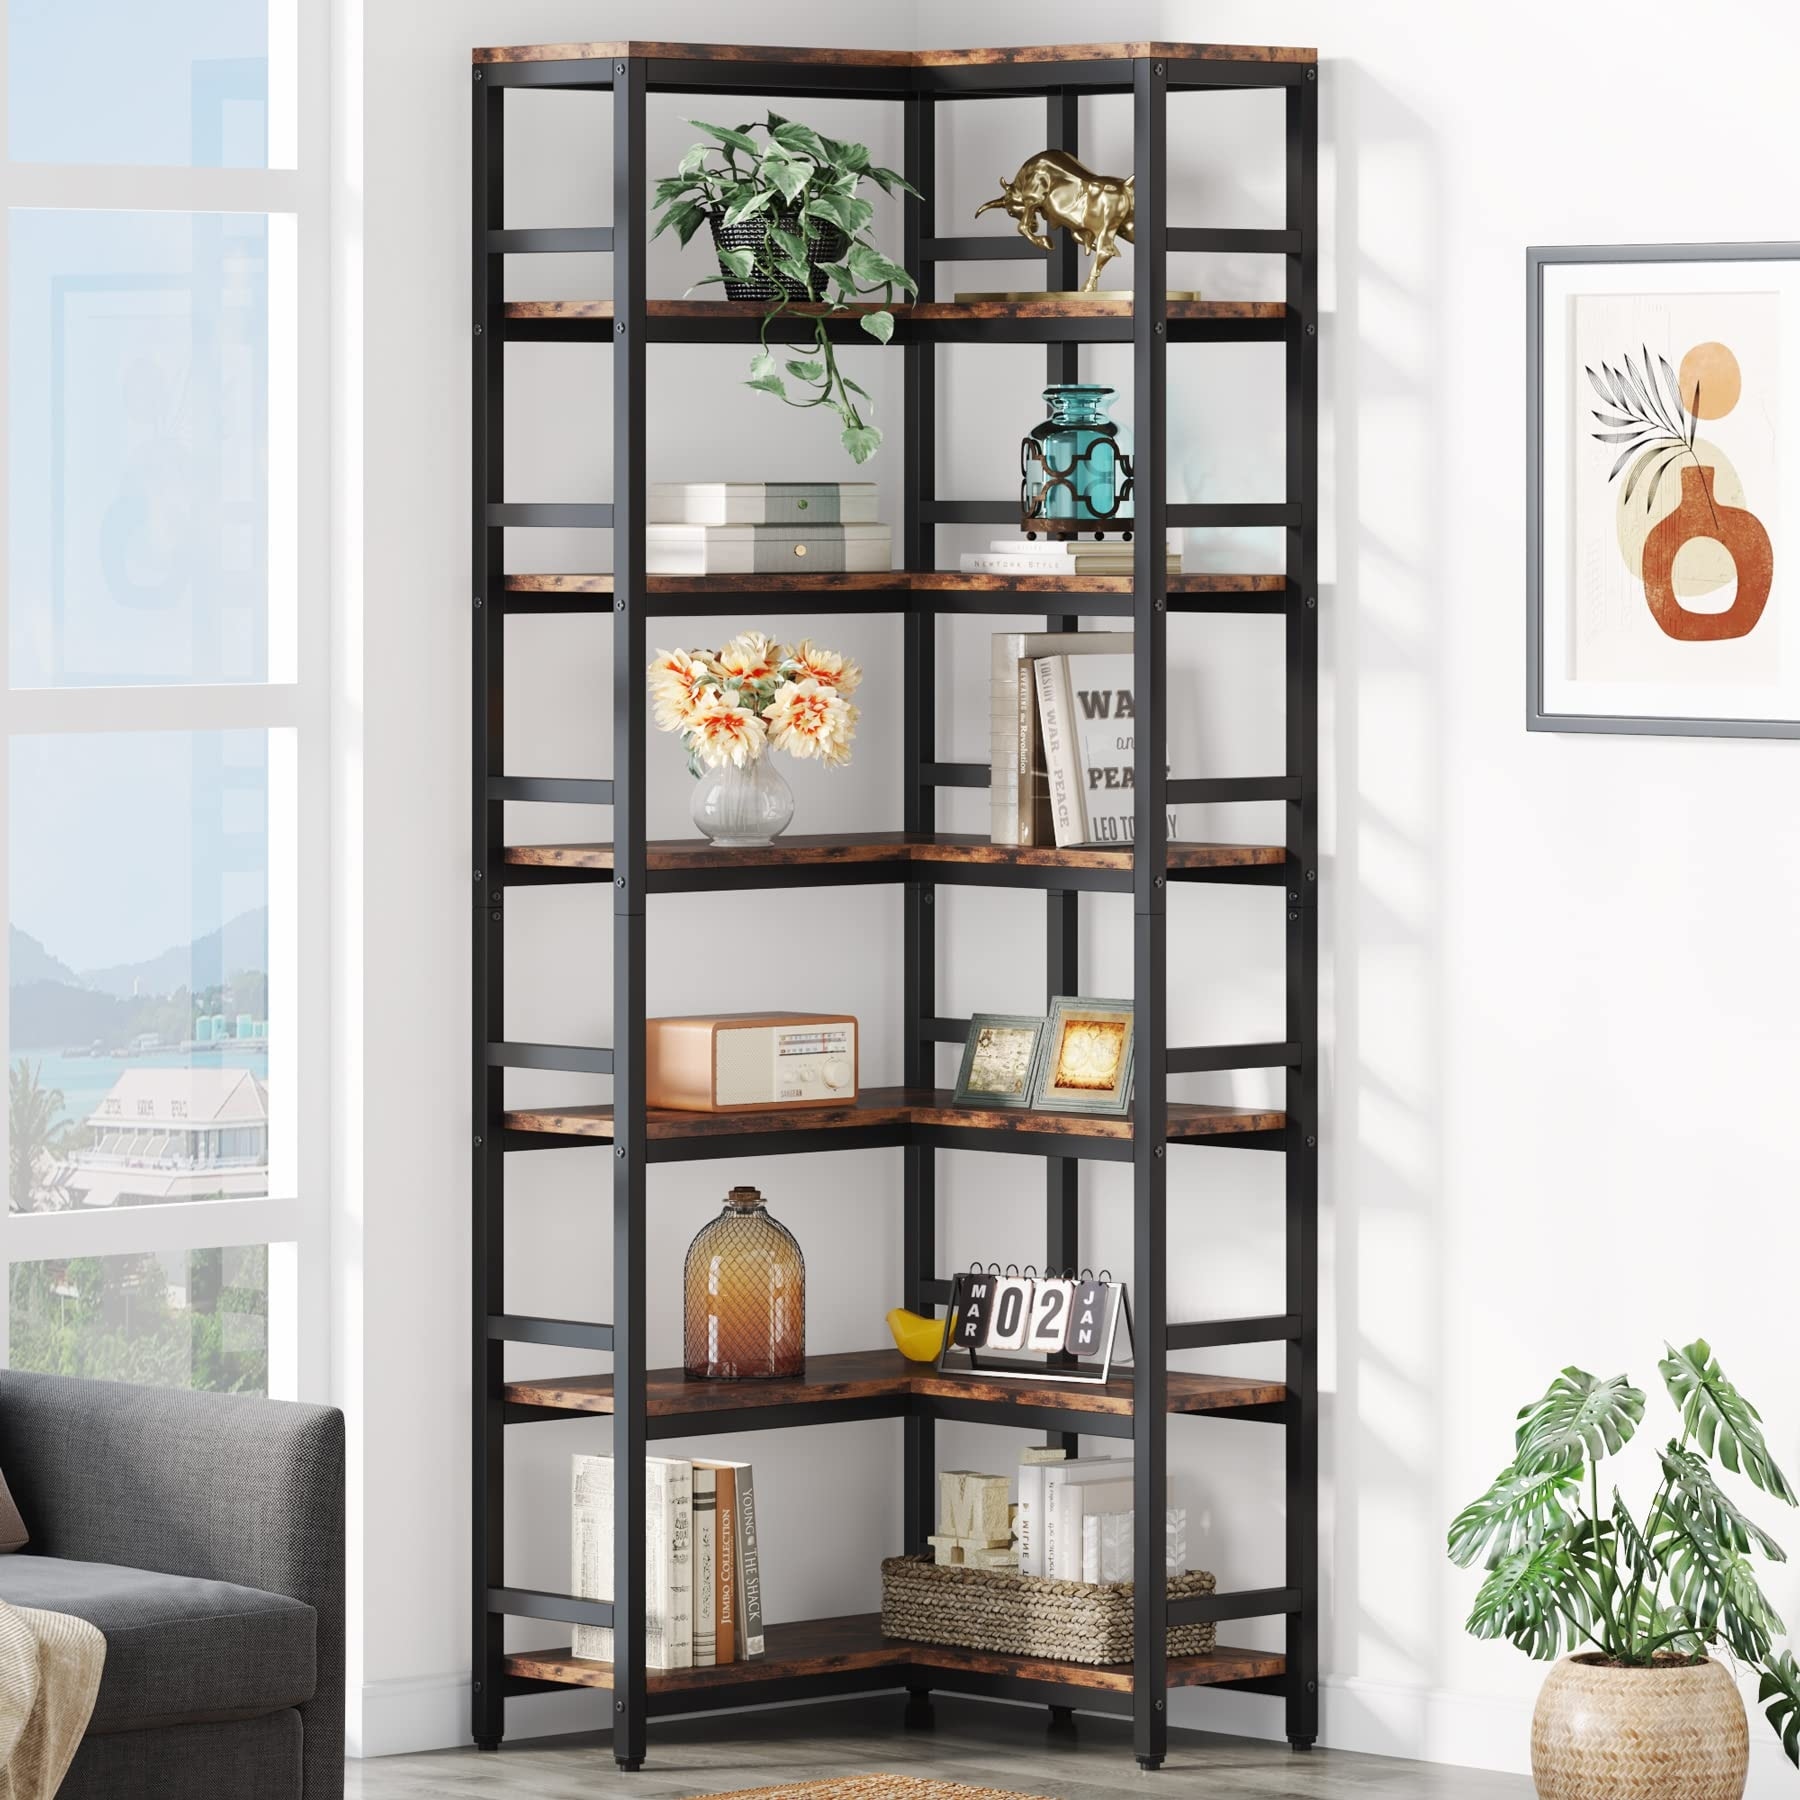 https://ak1.ostkcdn.com/images/products/is/images/direct/4480601b99120325af4b6630a63945cd28c7b7a9/5-Tier-Corner-Bookshelf%2C-Industrial-Large-Corner-Etagere-Bookcase-for-Living-Room-Home-Office%2C-Rustic-Brown.jpg